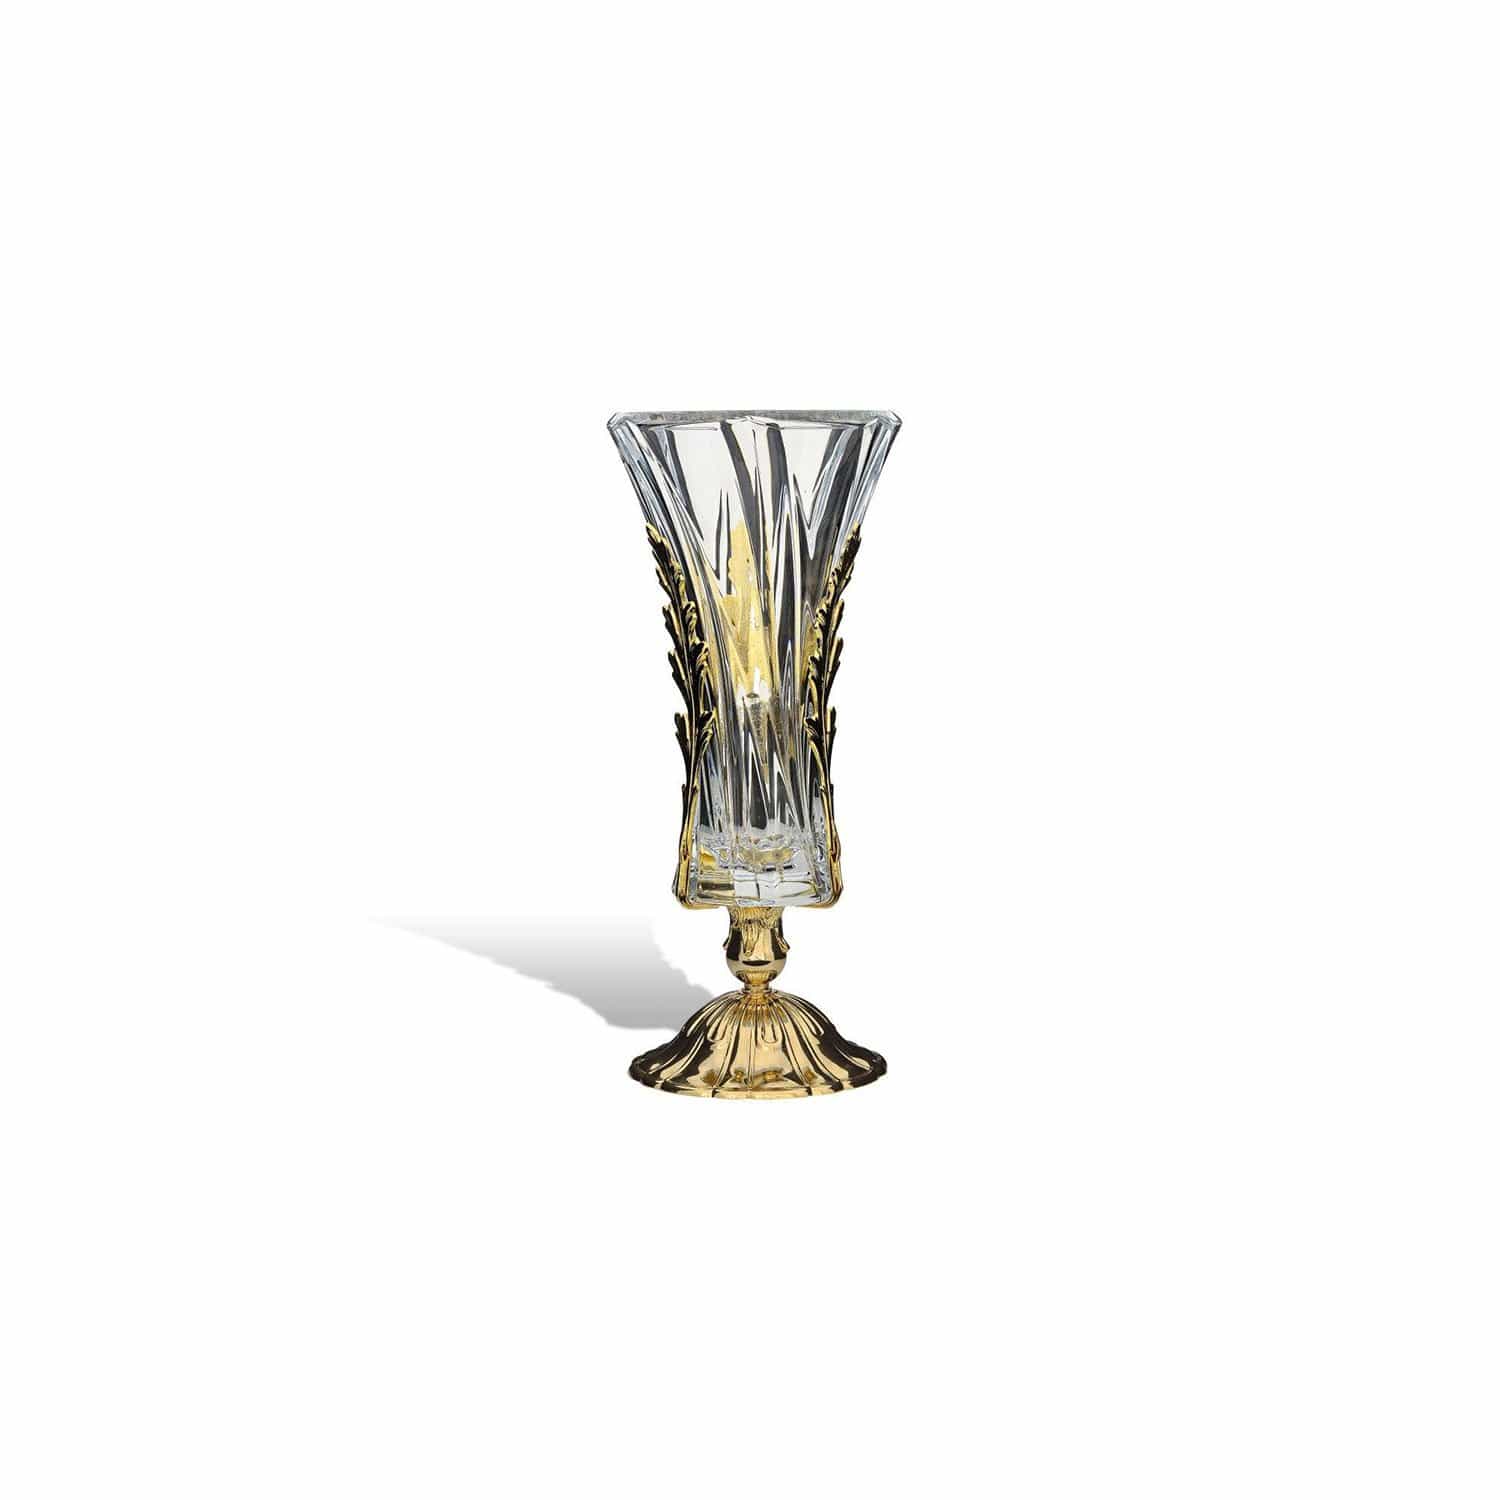 DUBAI VASE CLEAR GLASS GOLD METAL BASE WITH LEAVES - DC3203